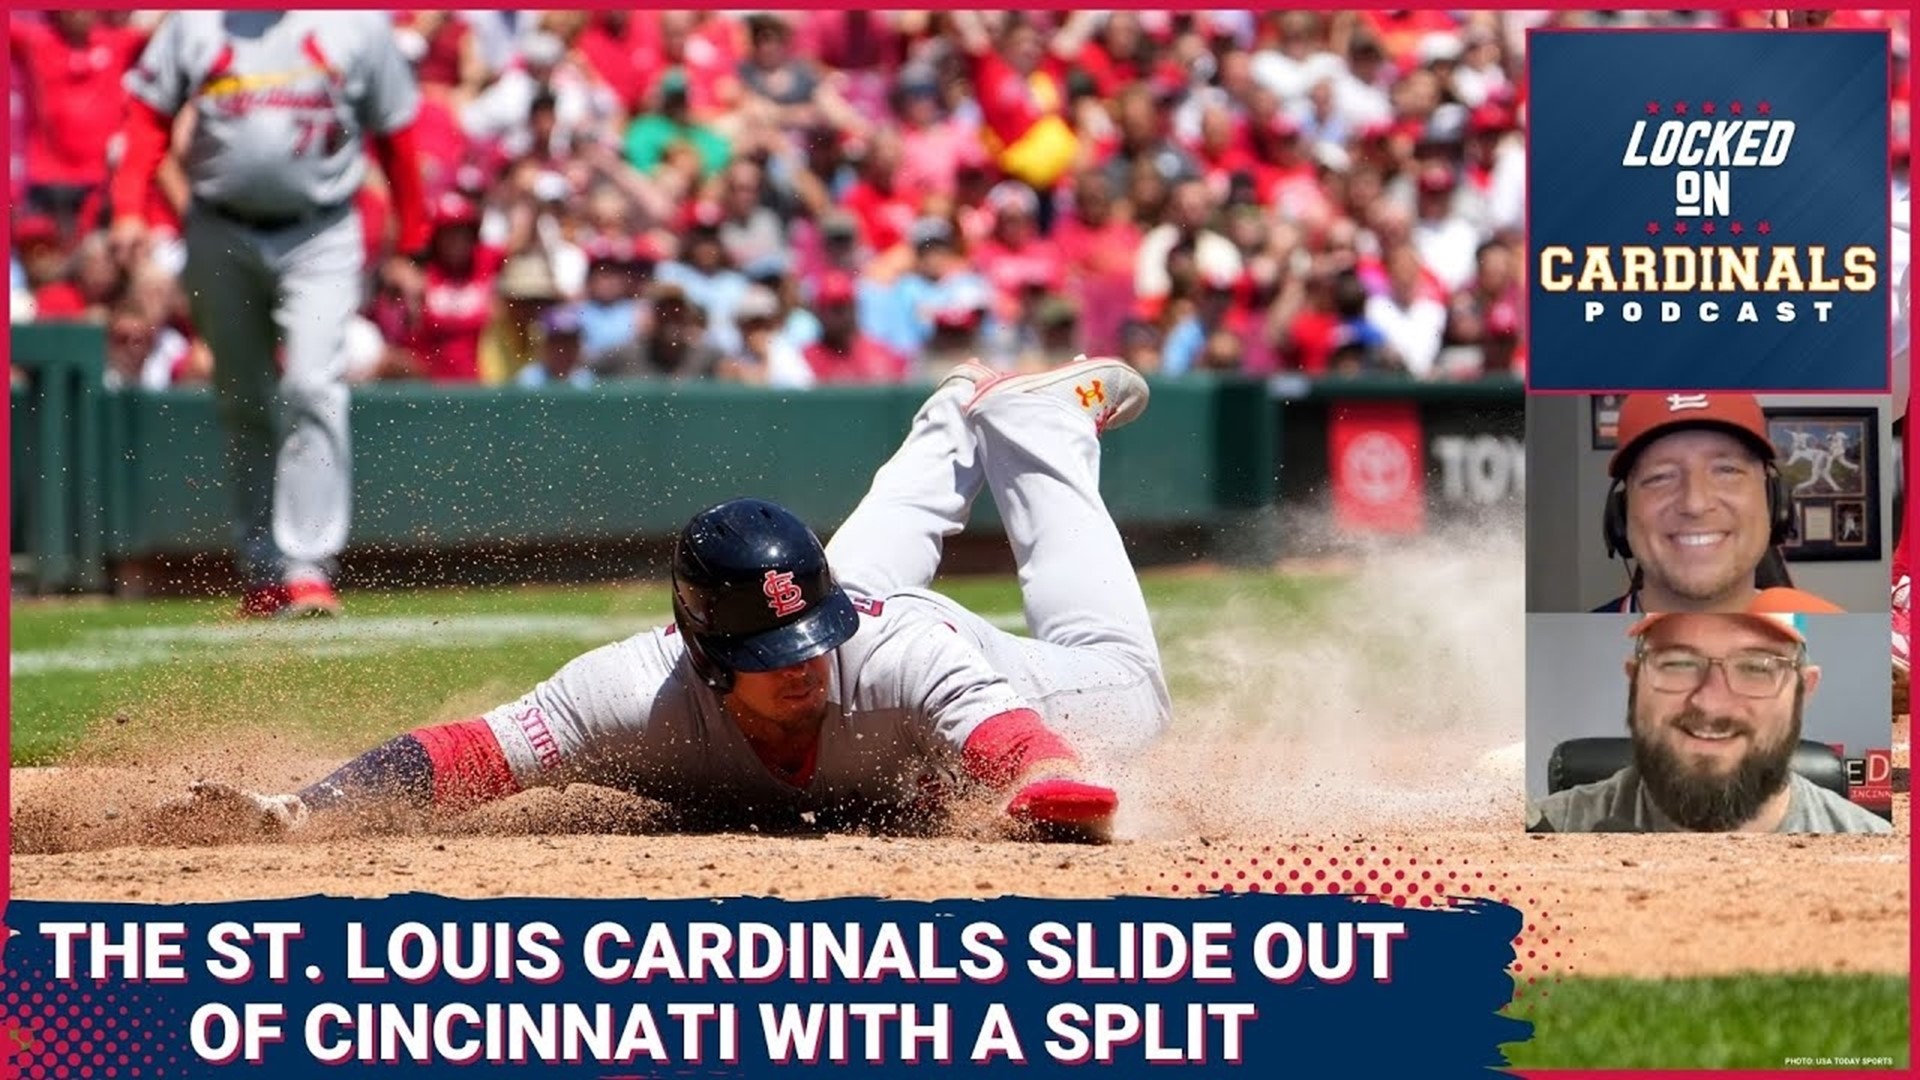 CROSSOVER: What We Learned From the St. Louis Cardinals vs Cincinnati Reds Series